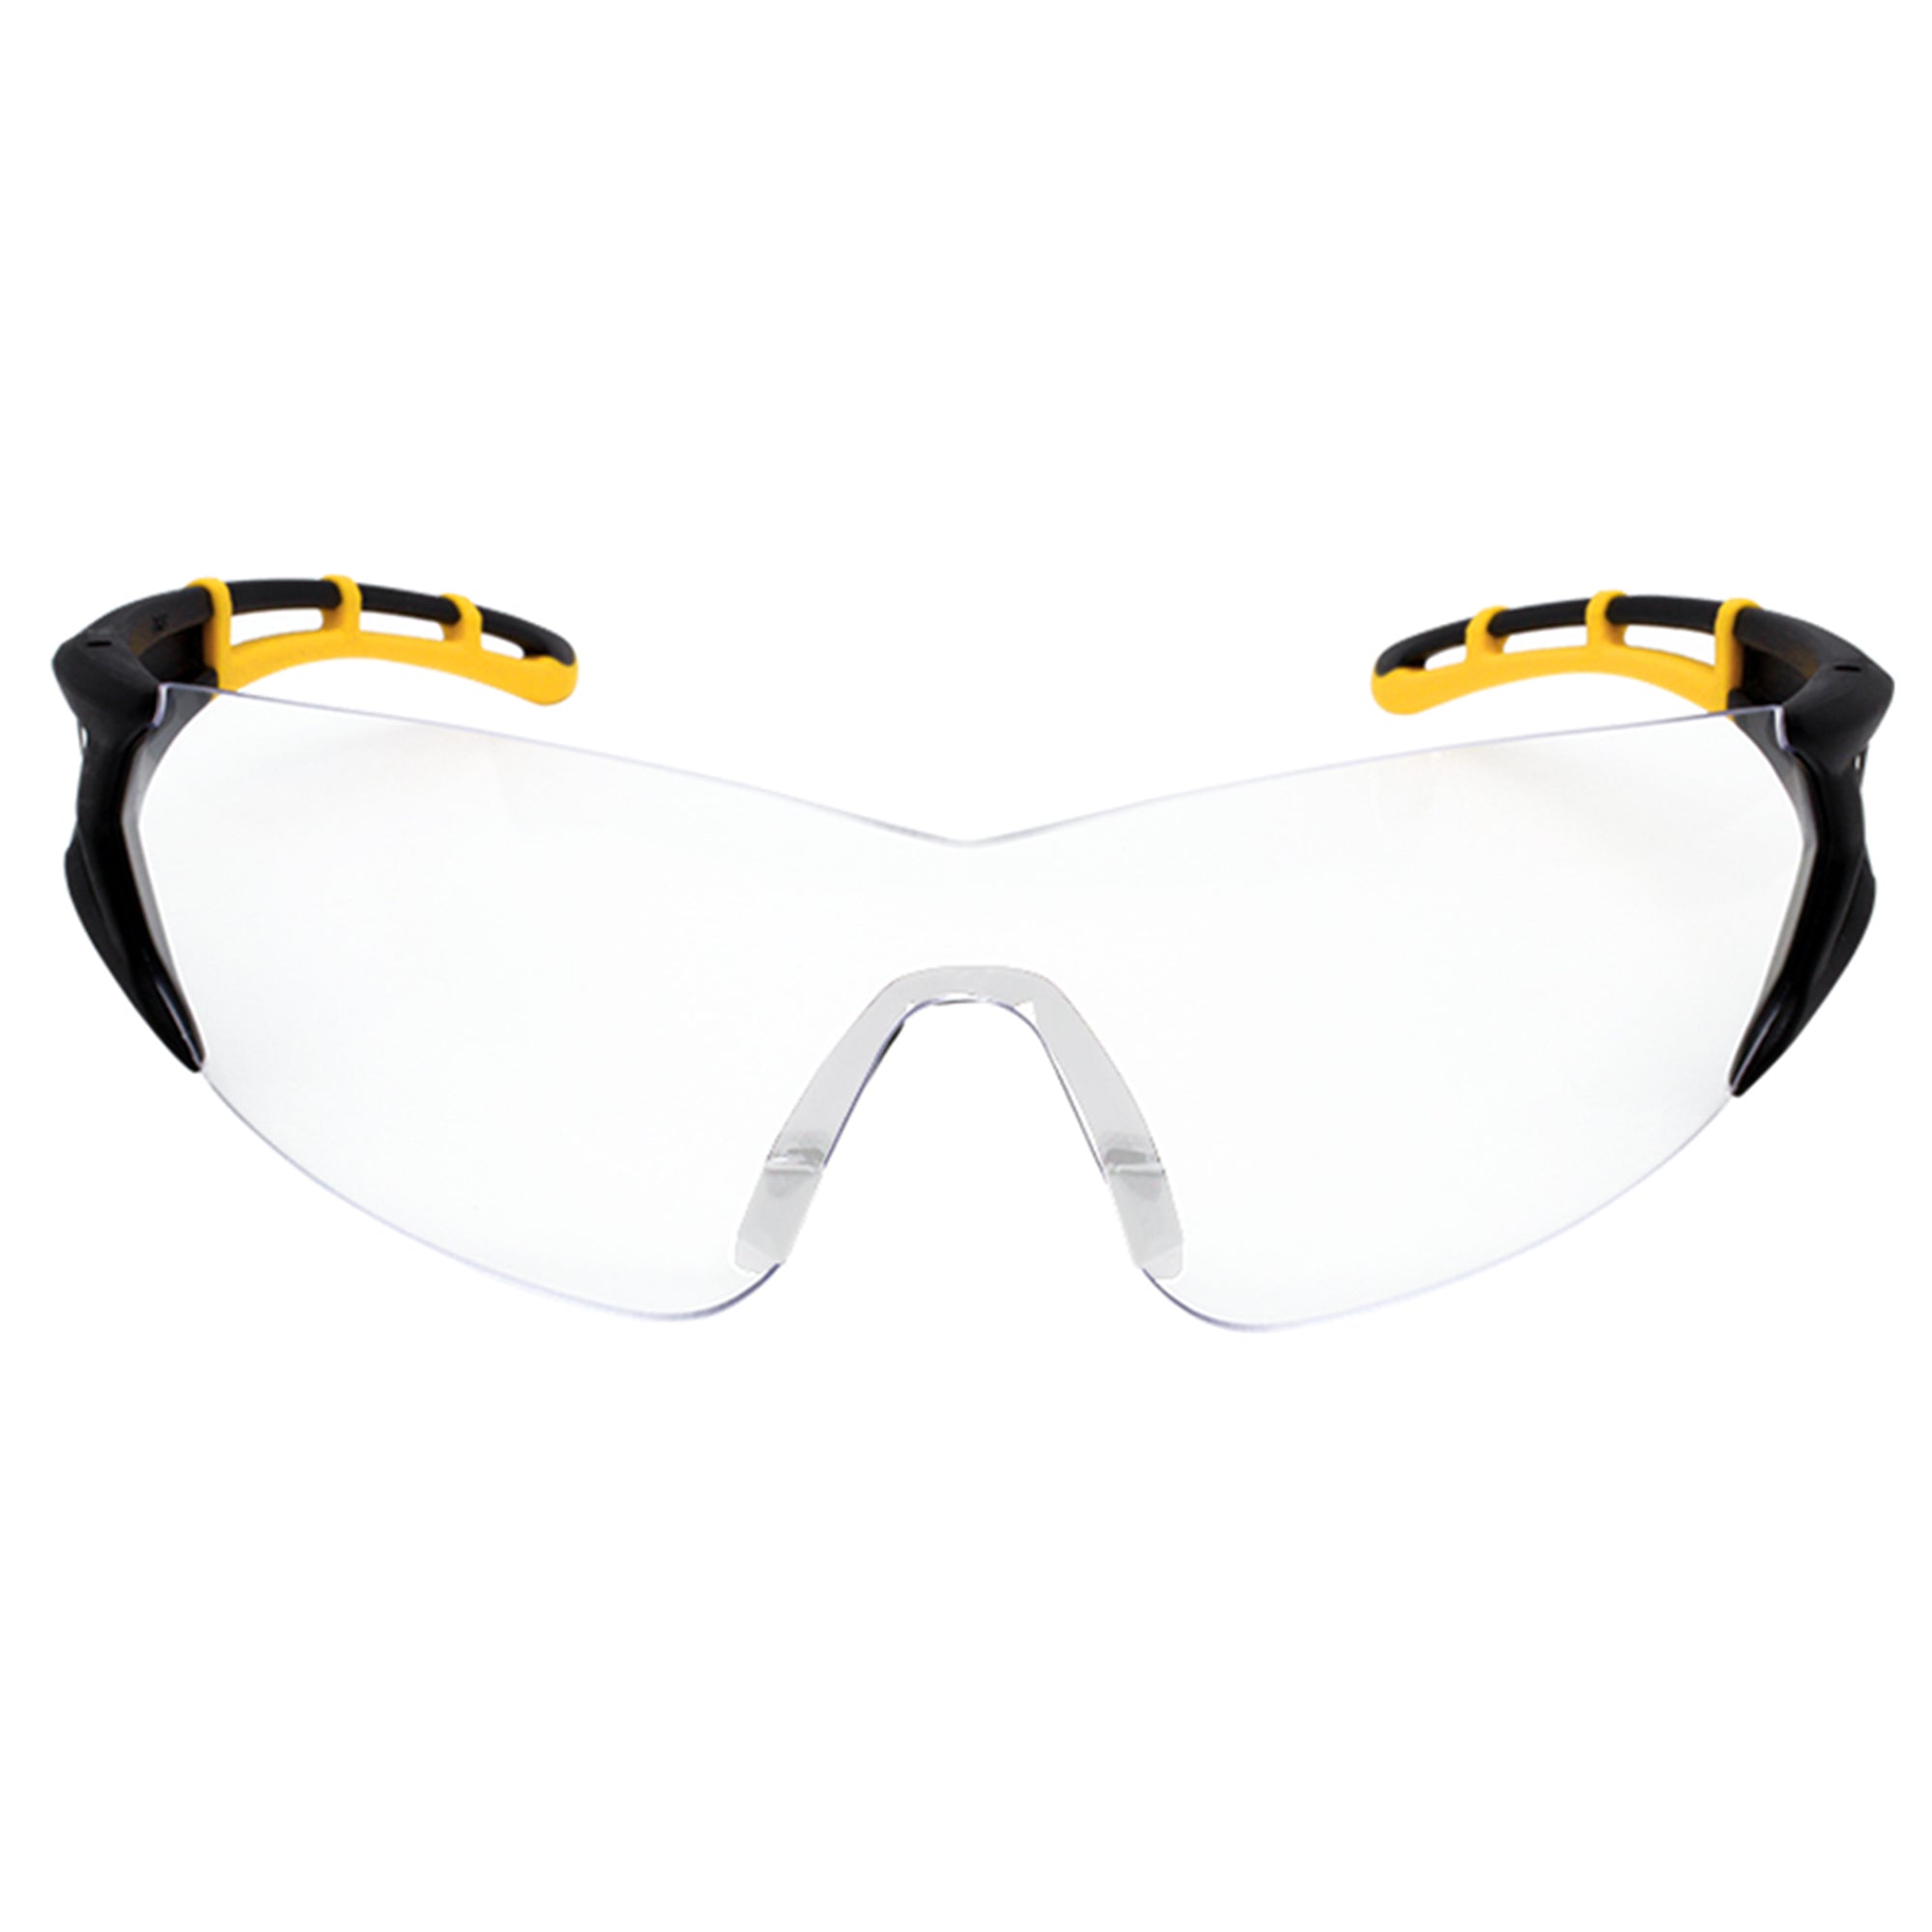 WORKHORSE® Modern, Premium Anti-Fog and Anti-Scratch Coated Safety Glasses, Black and Yellow Frame, Clear Lens